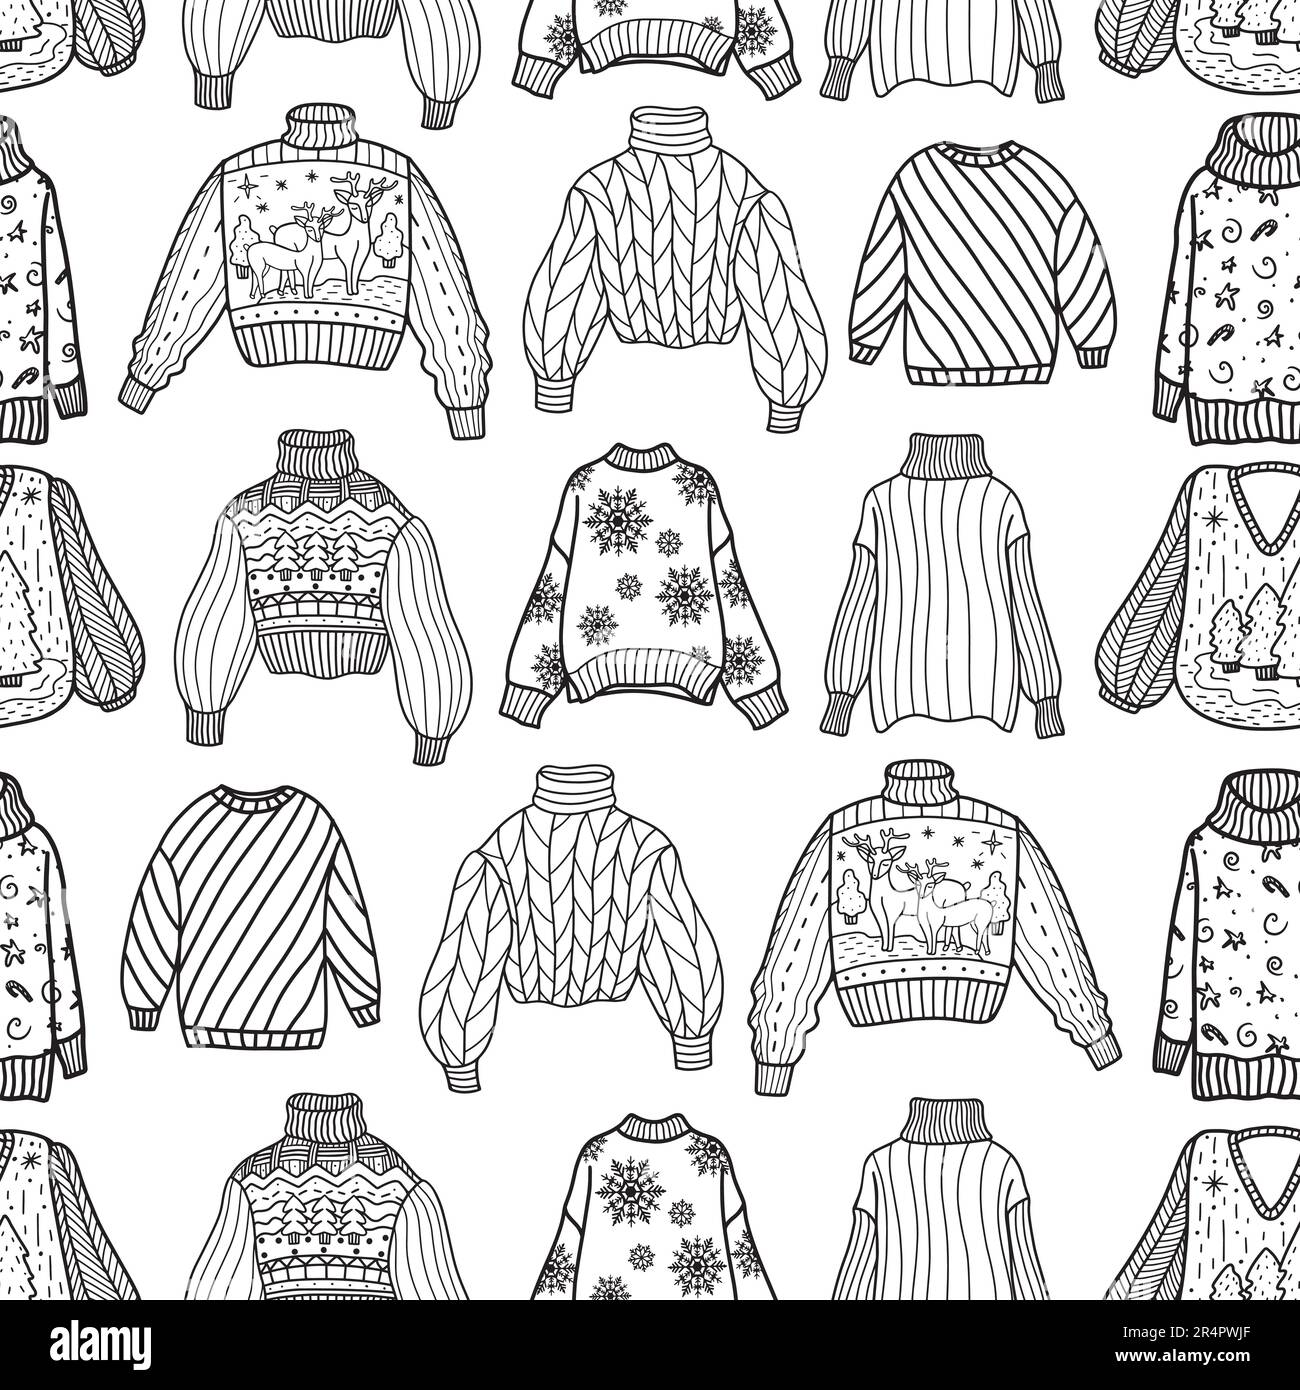 Winter clothing seamless pattern in doodle style hand drawn ...